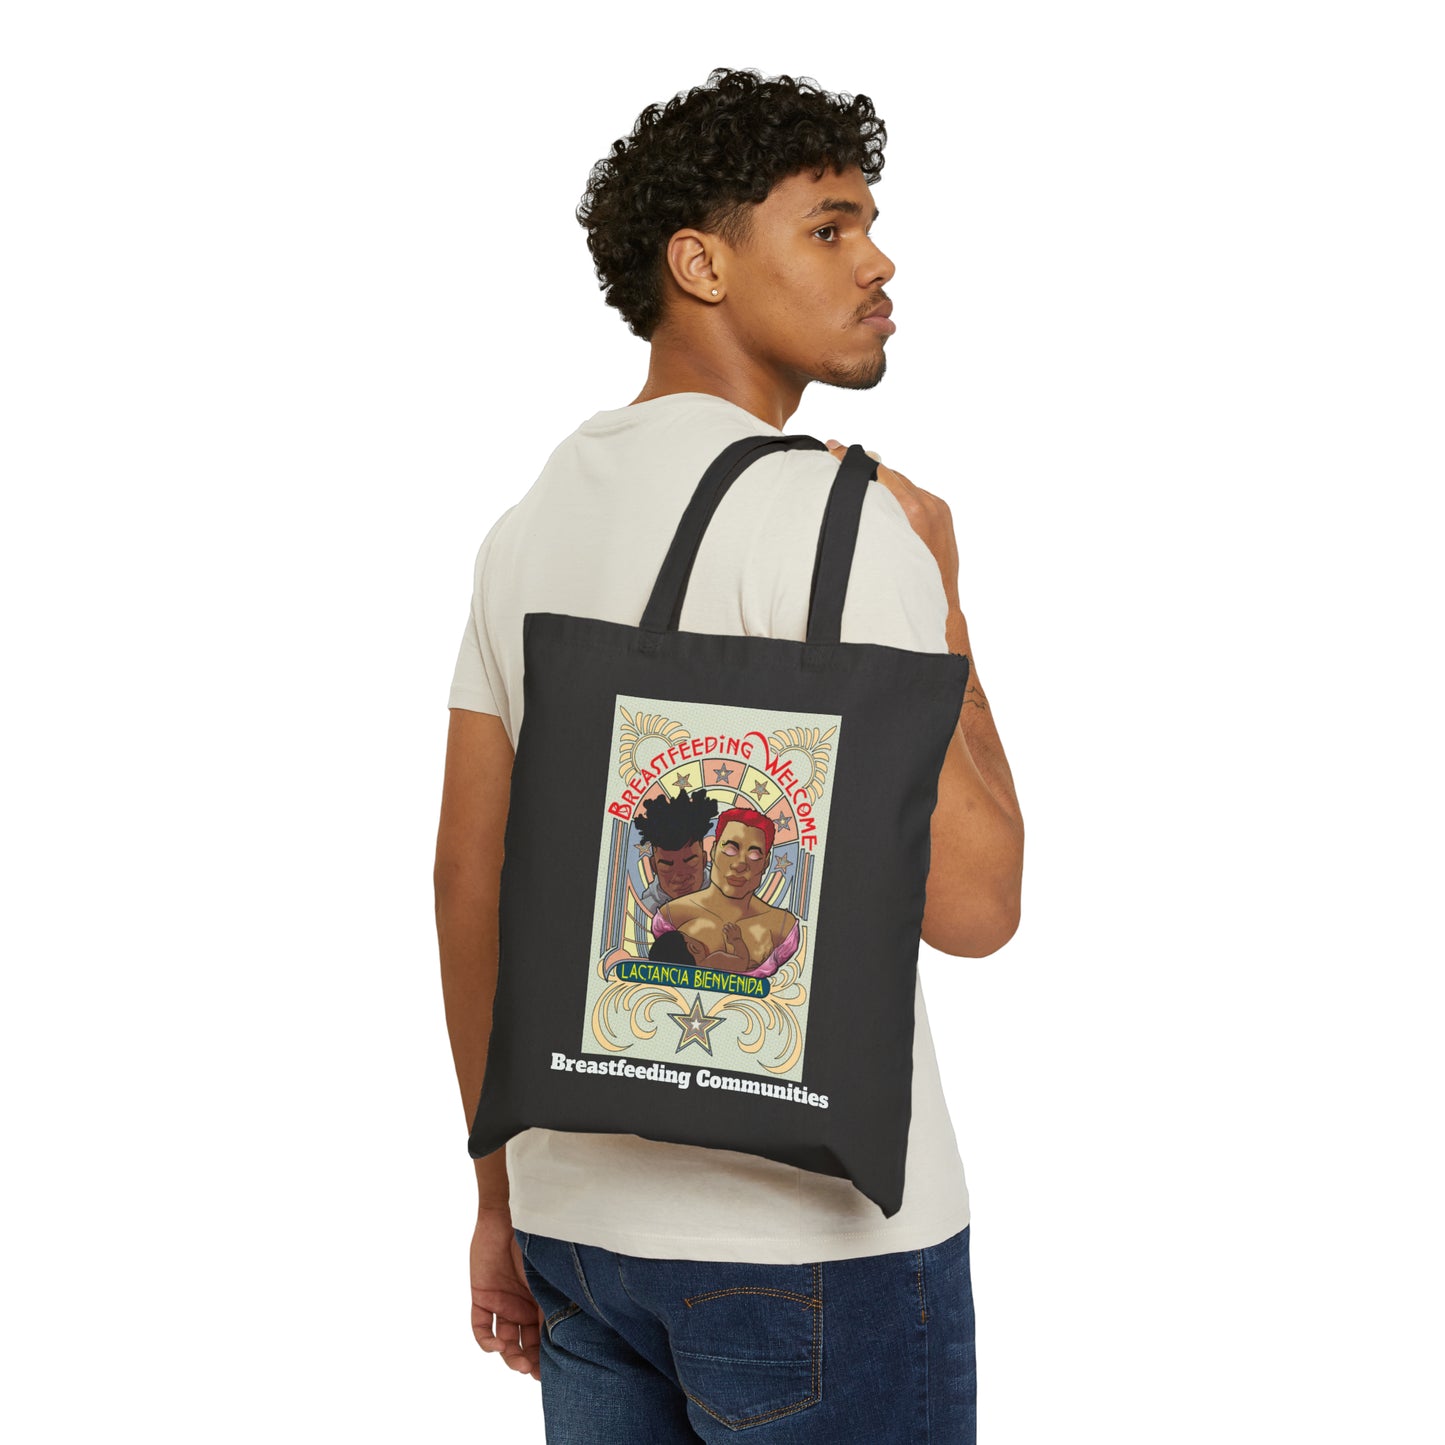 Welcome 1 - Cotton Canvas Tote Bag